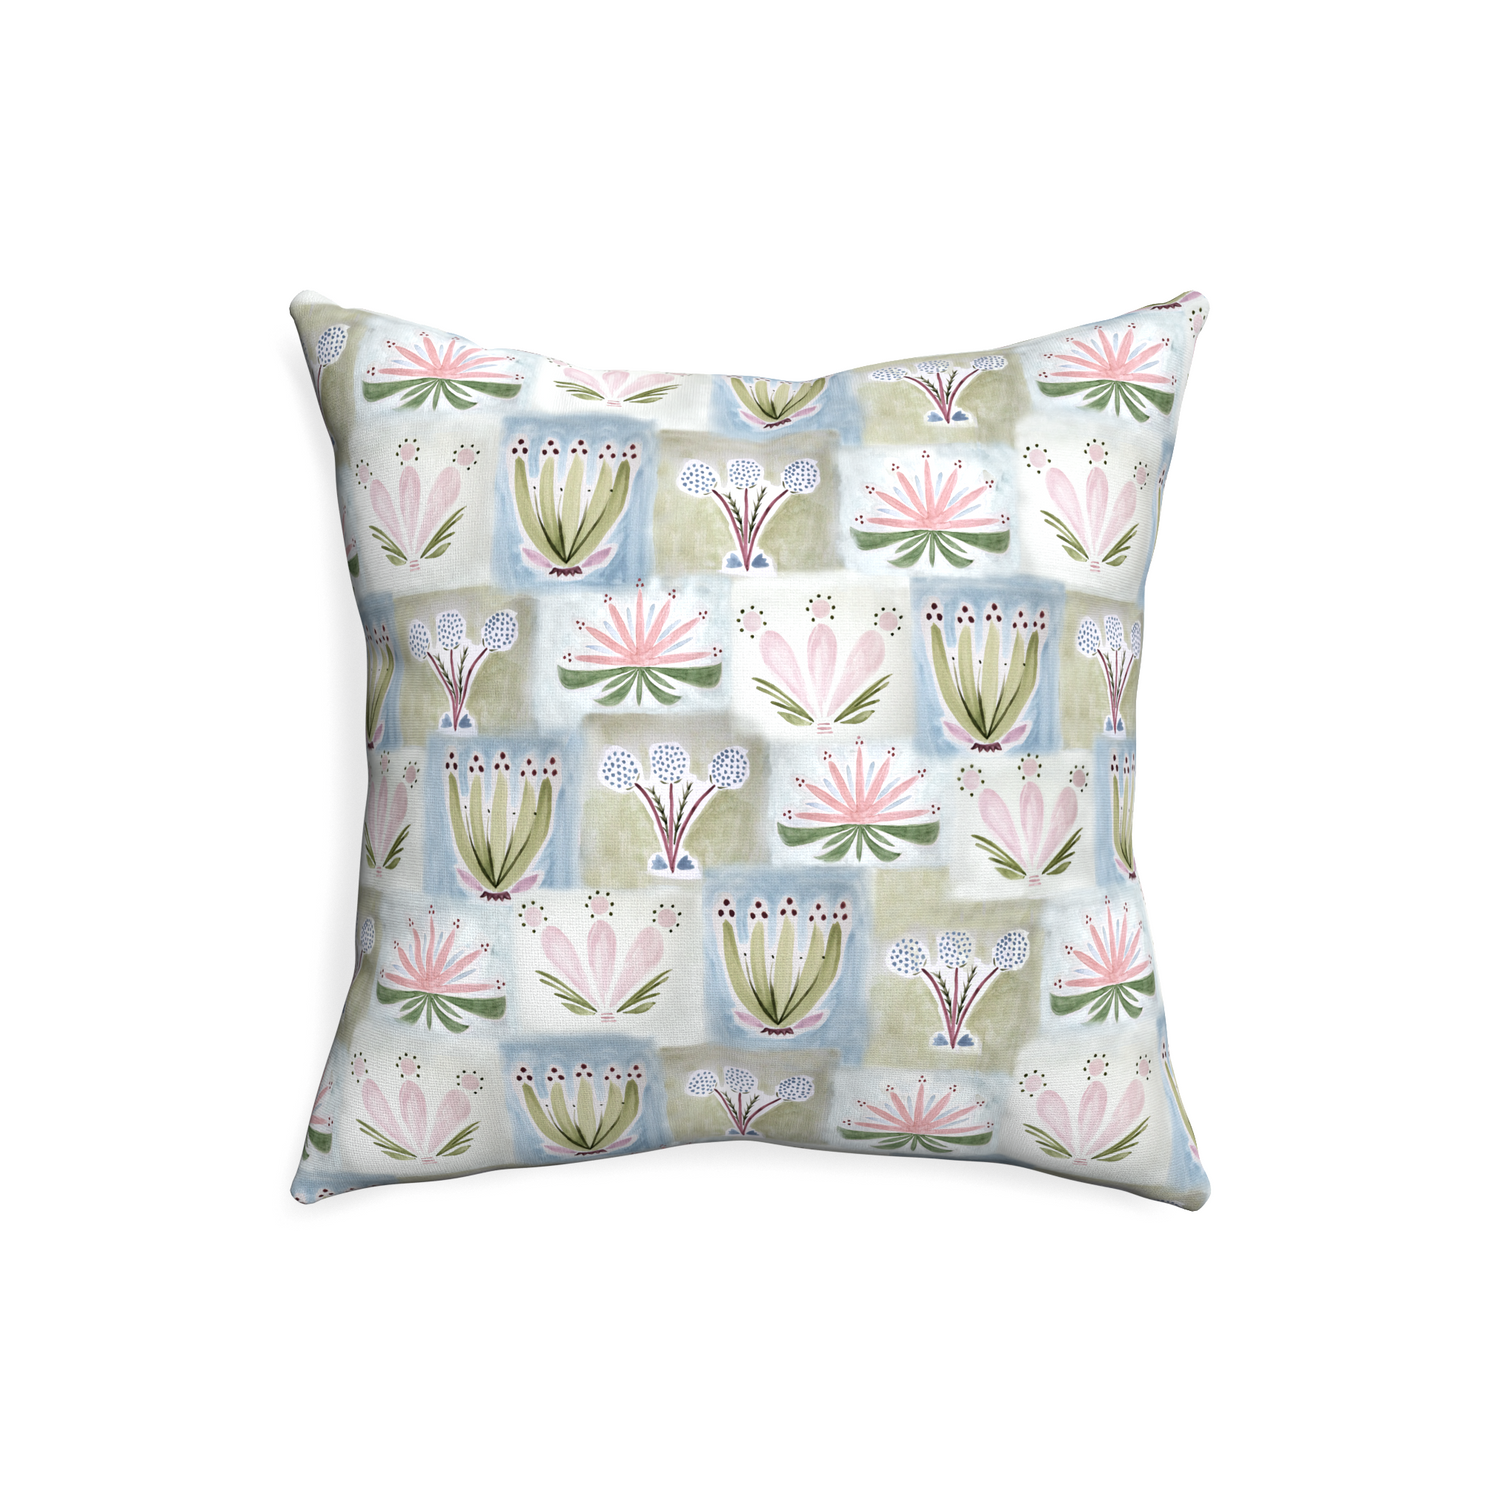 20-square harper custom hand-painted floralpillow with none on white background